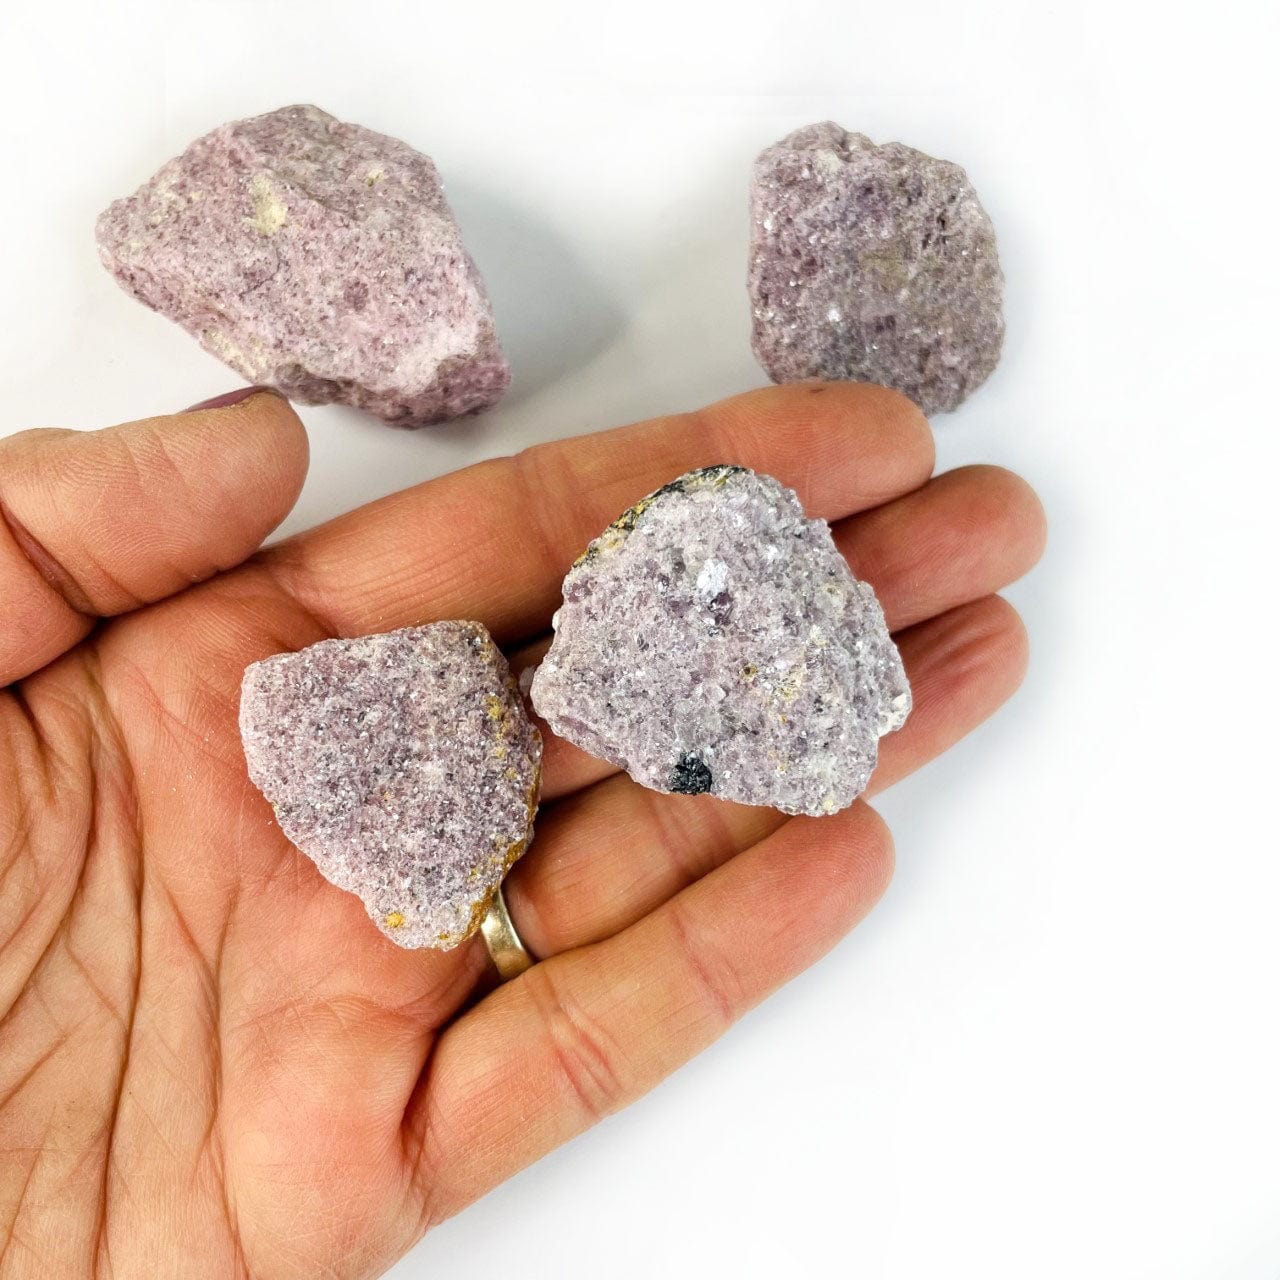 2 pieces of rough lepidolite in a hand for size reference